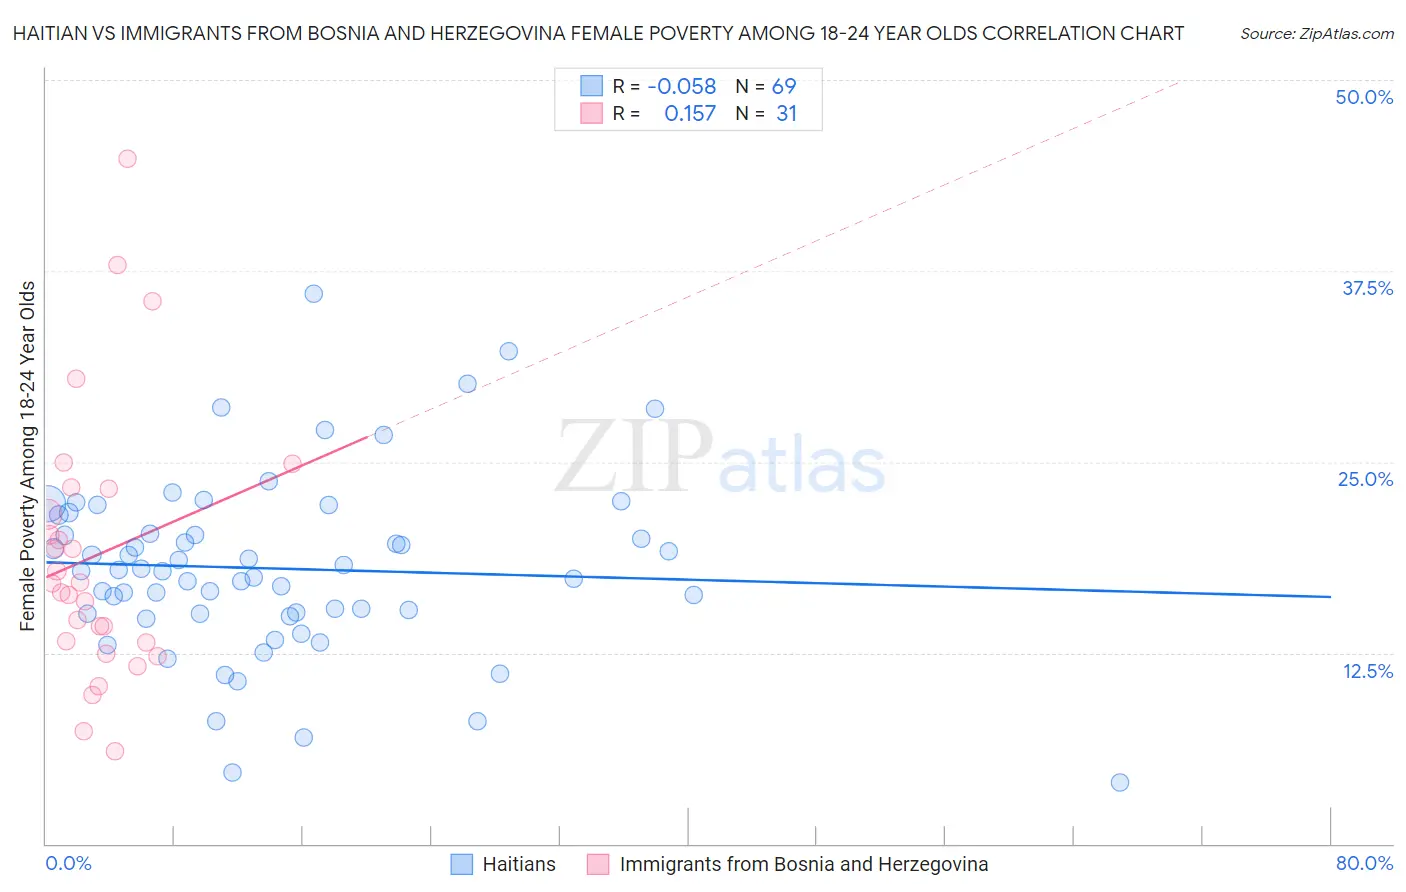 Haitian vs Immigrants from Bosnia and Herzegovina Female Poverty Among 18-24 Year Olds